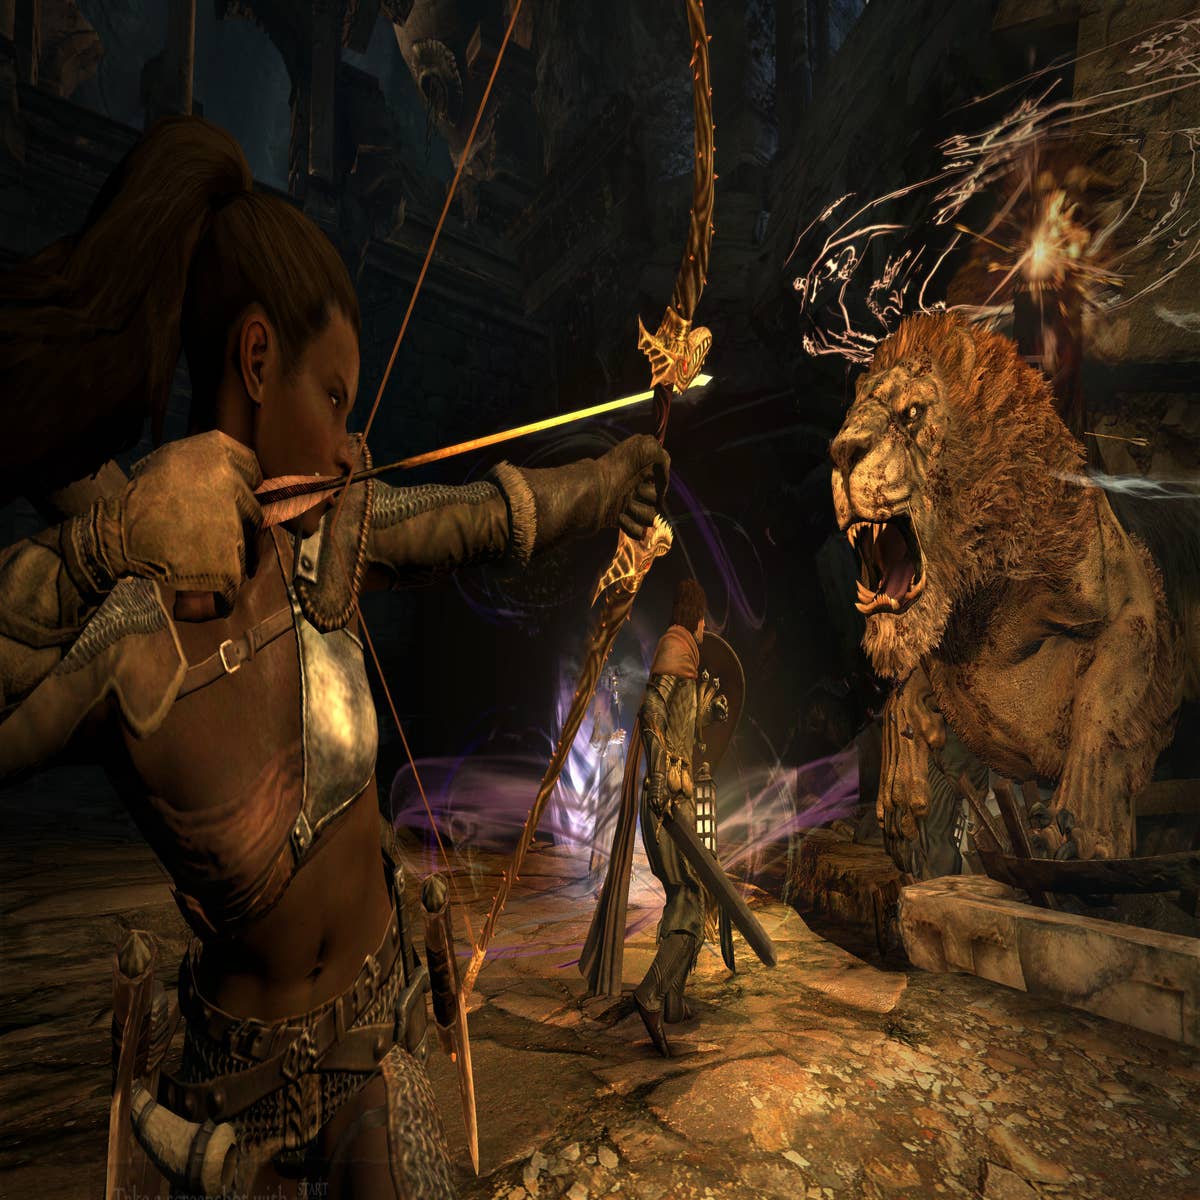 Dragon's Dogma Season 1 Review: A Heartbreaking Disappointment